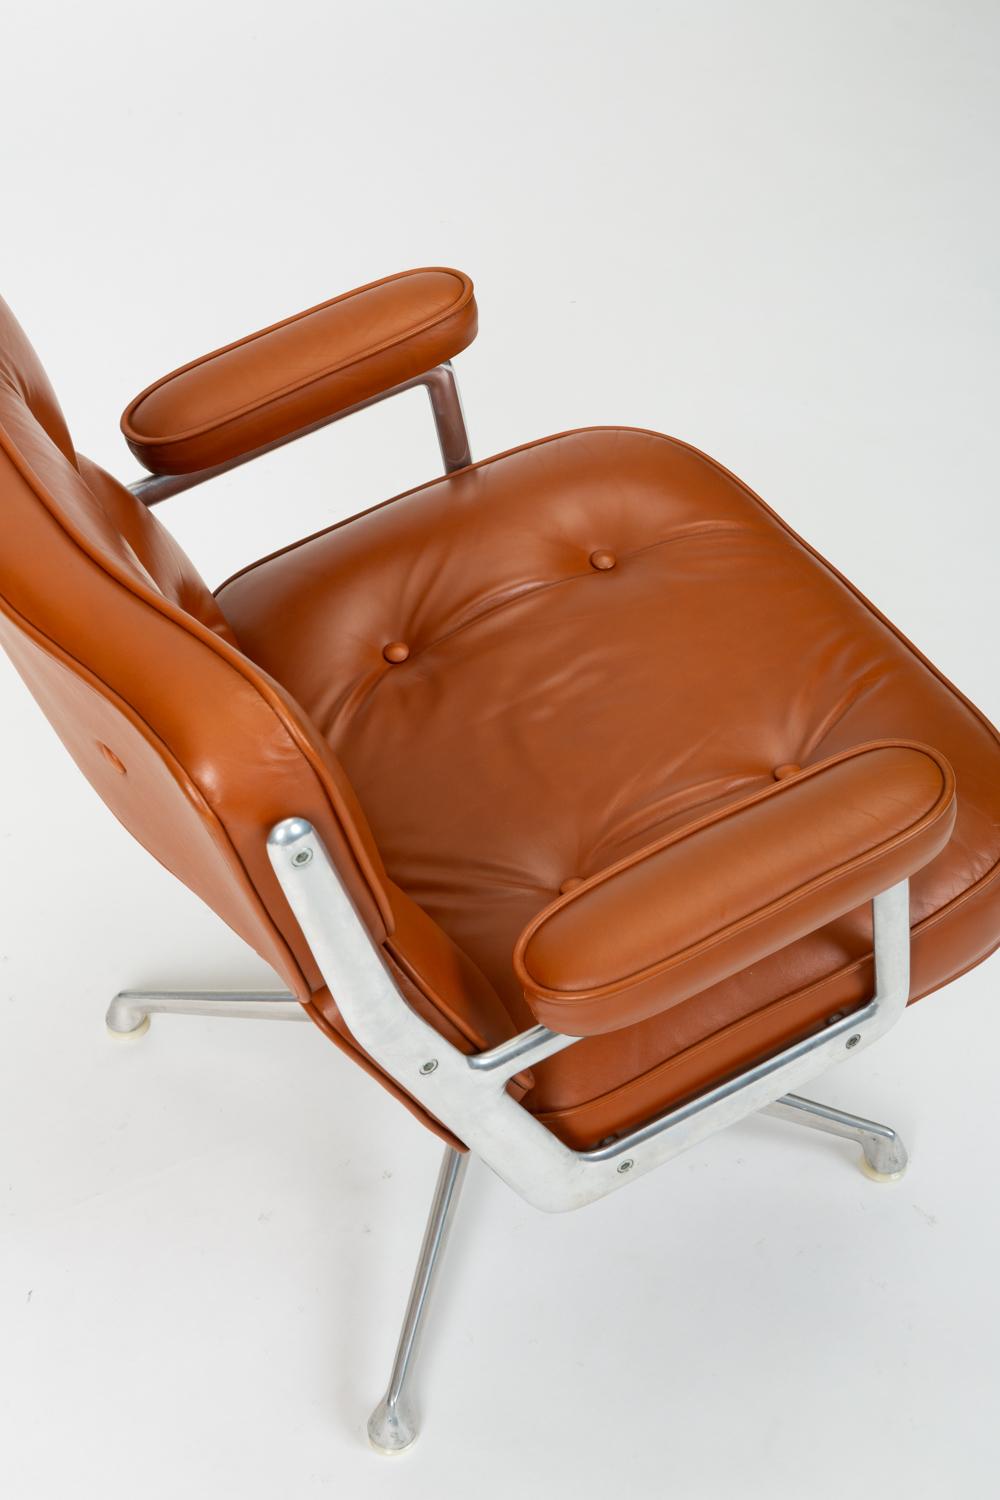 Ray and Charles Eames Time Life Lobby Chair in Cognac Leather 3